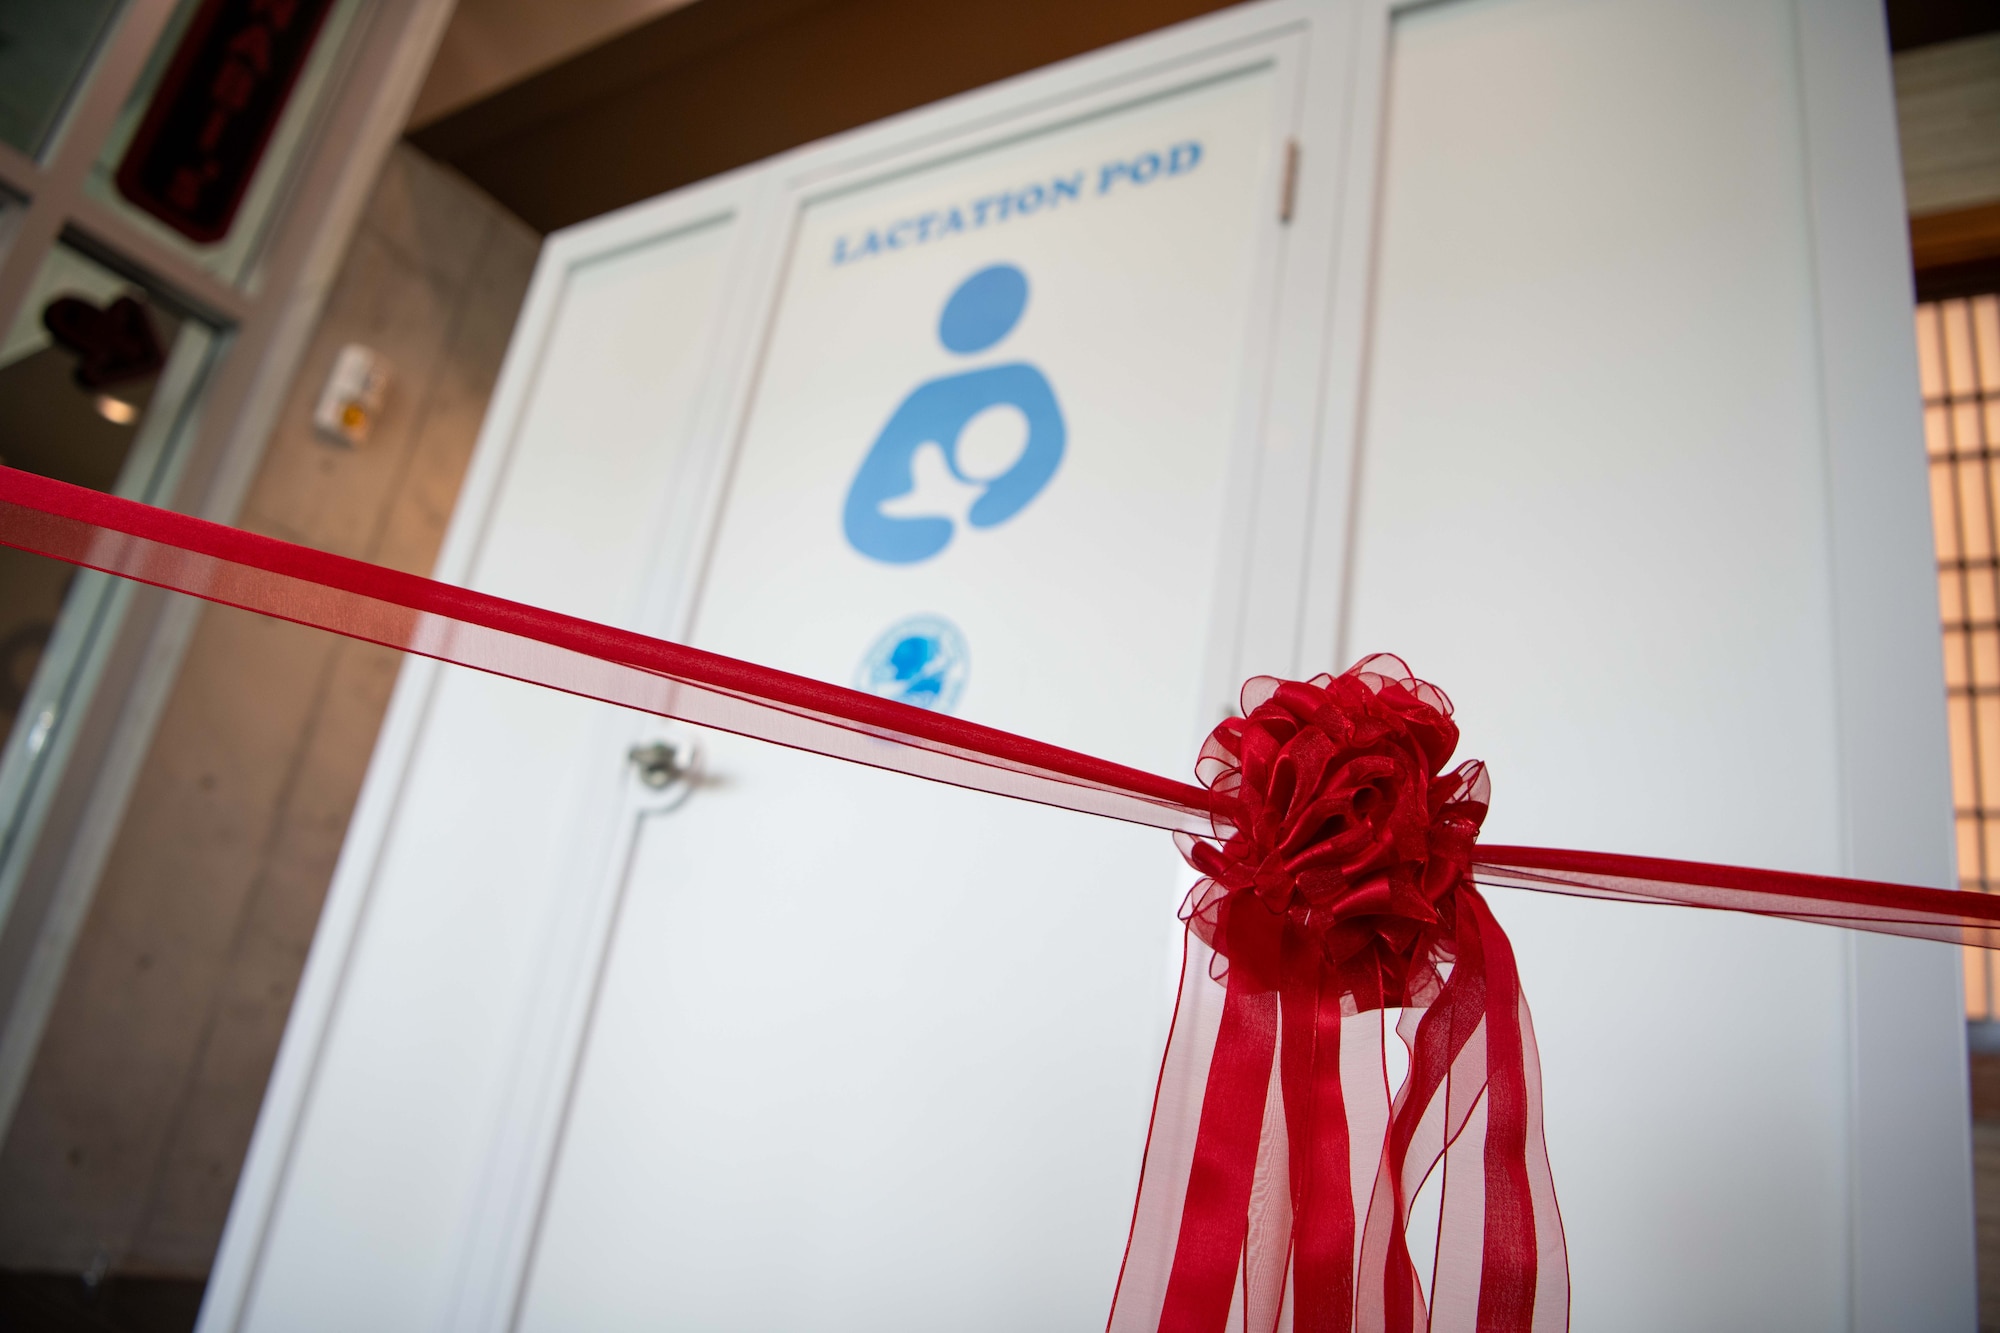 a red ribbon hangs tied in front of a lactation pod